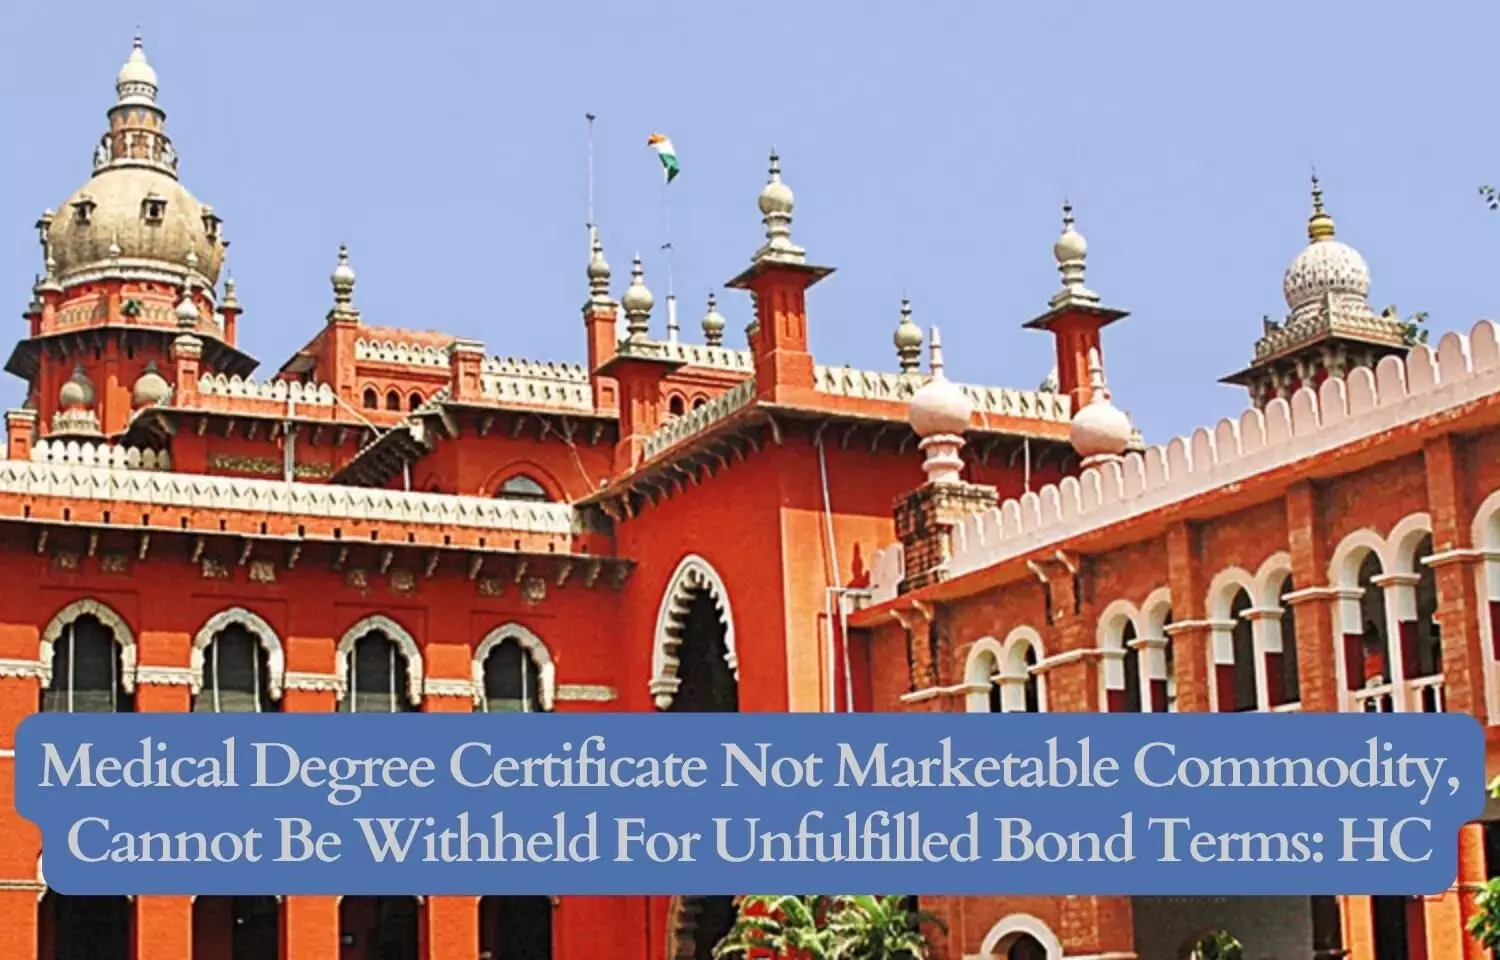 Medical degree certificate not marketable commodity, cannot be withheld for unfulfilled bond terms: Madras HC